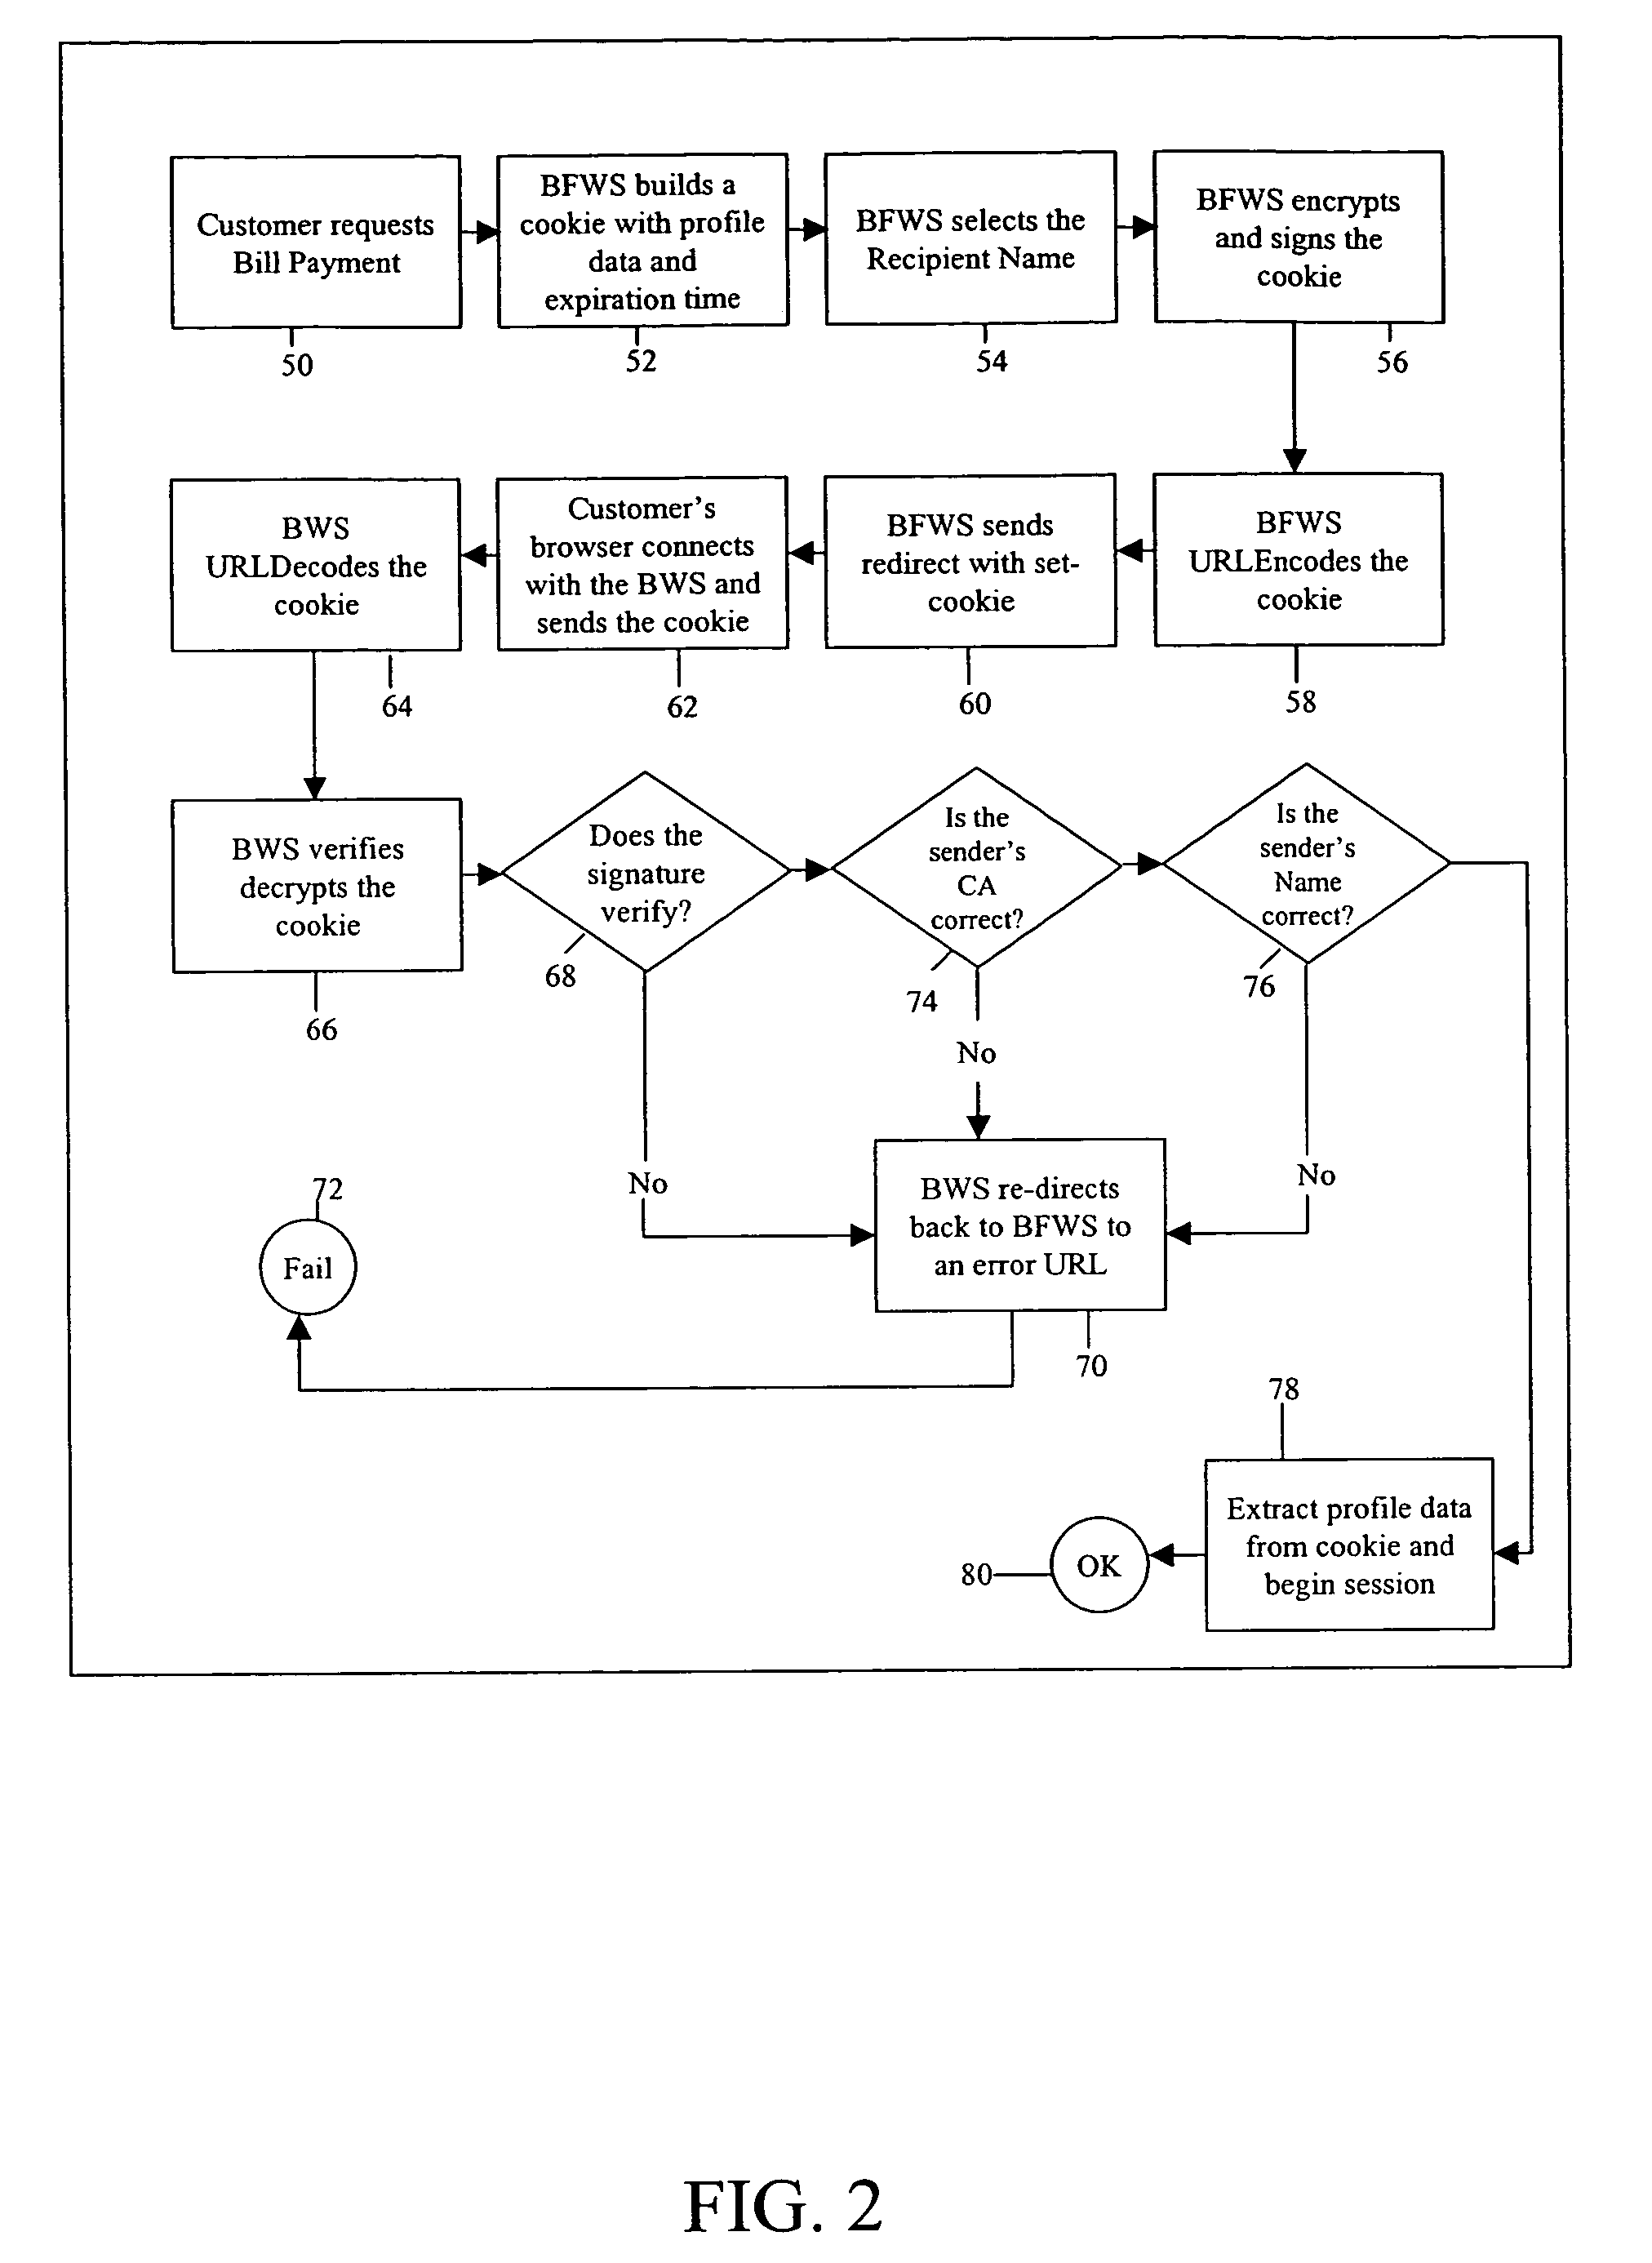 Method and system for single sign-on user access to multiple web servers